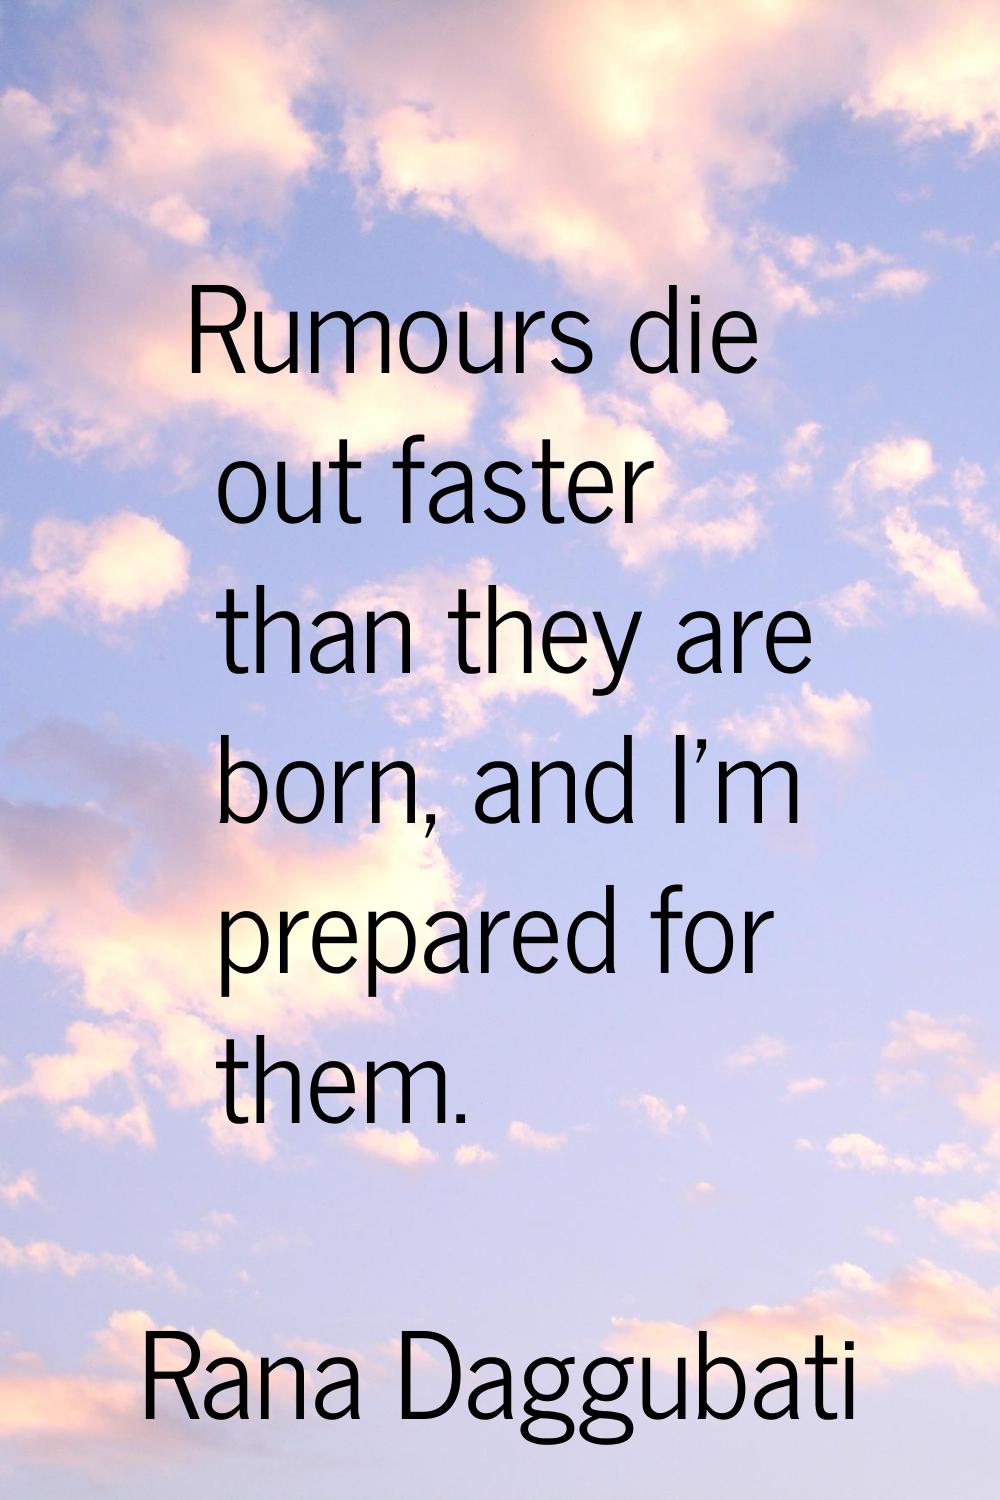 Rumours die out faster than they are born, and I'm prepared for them.